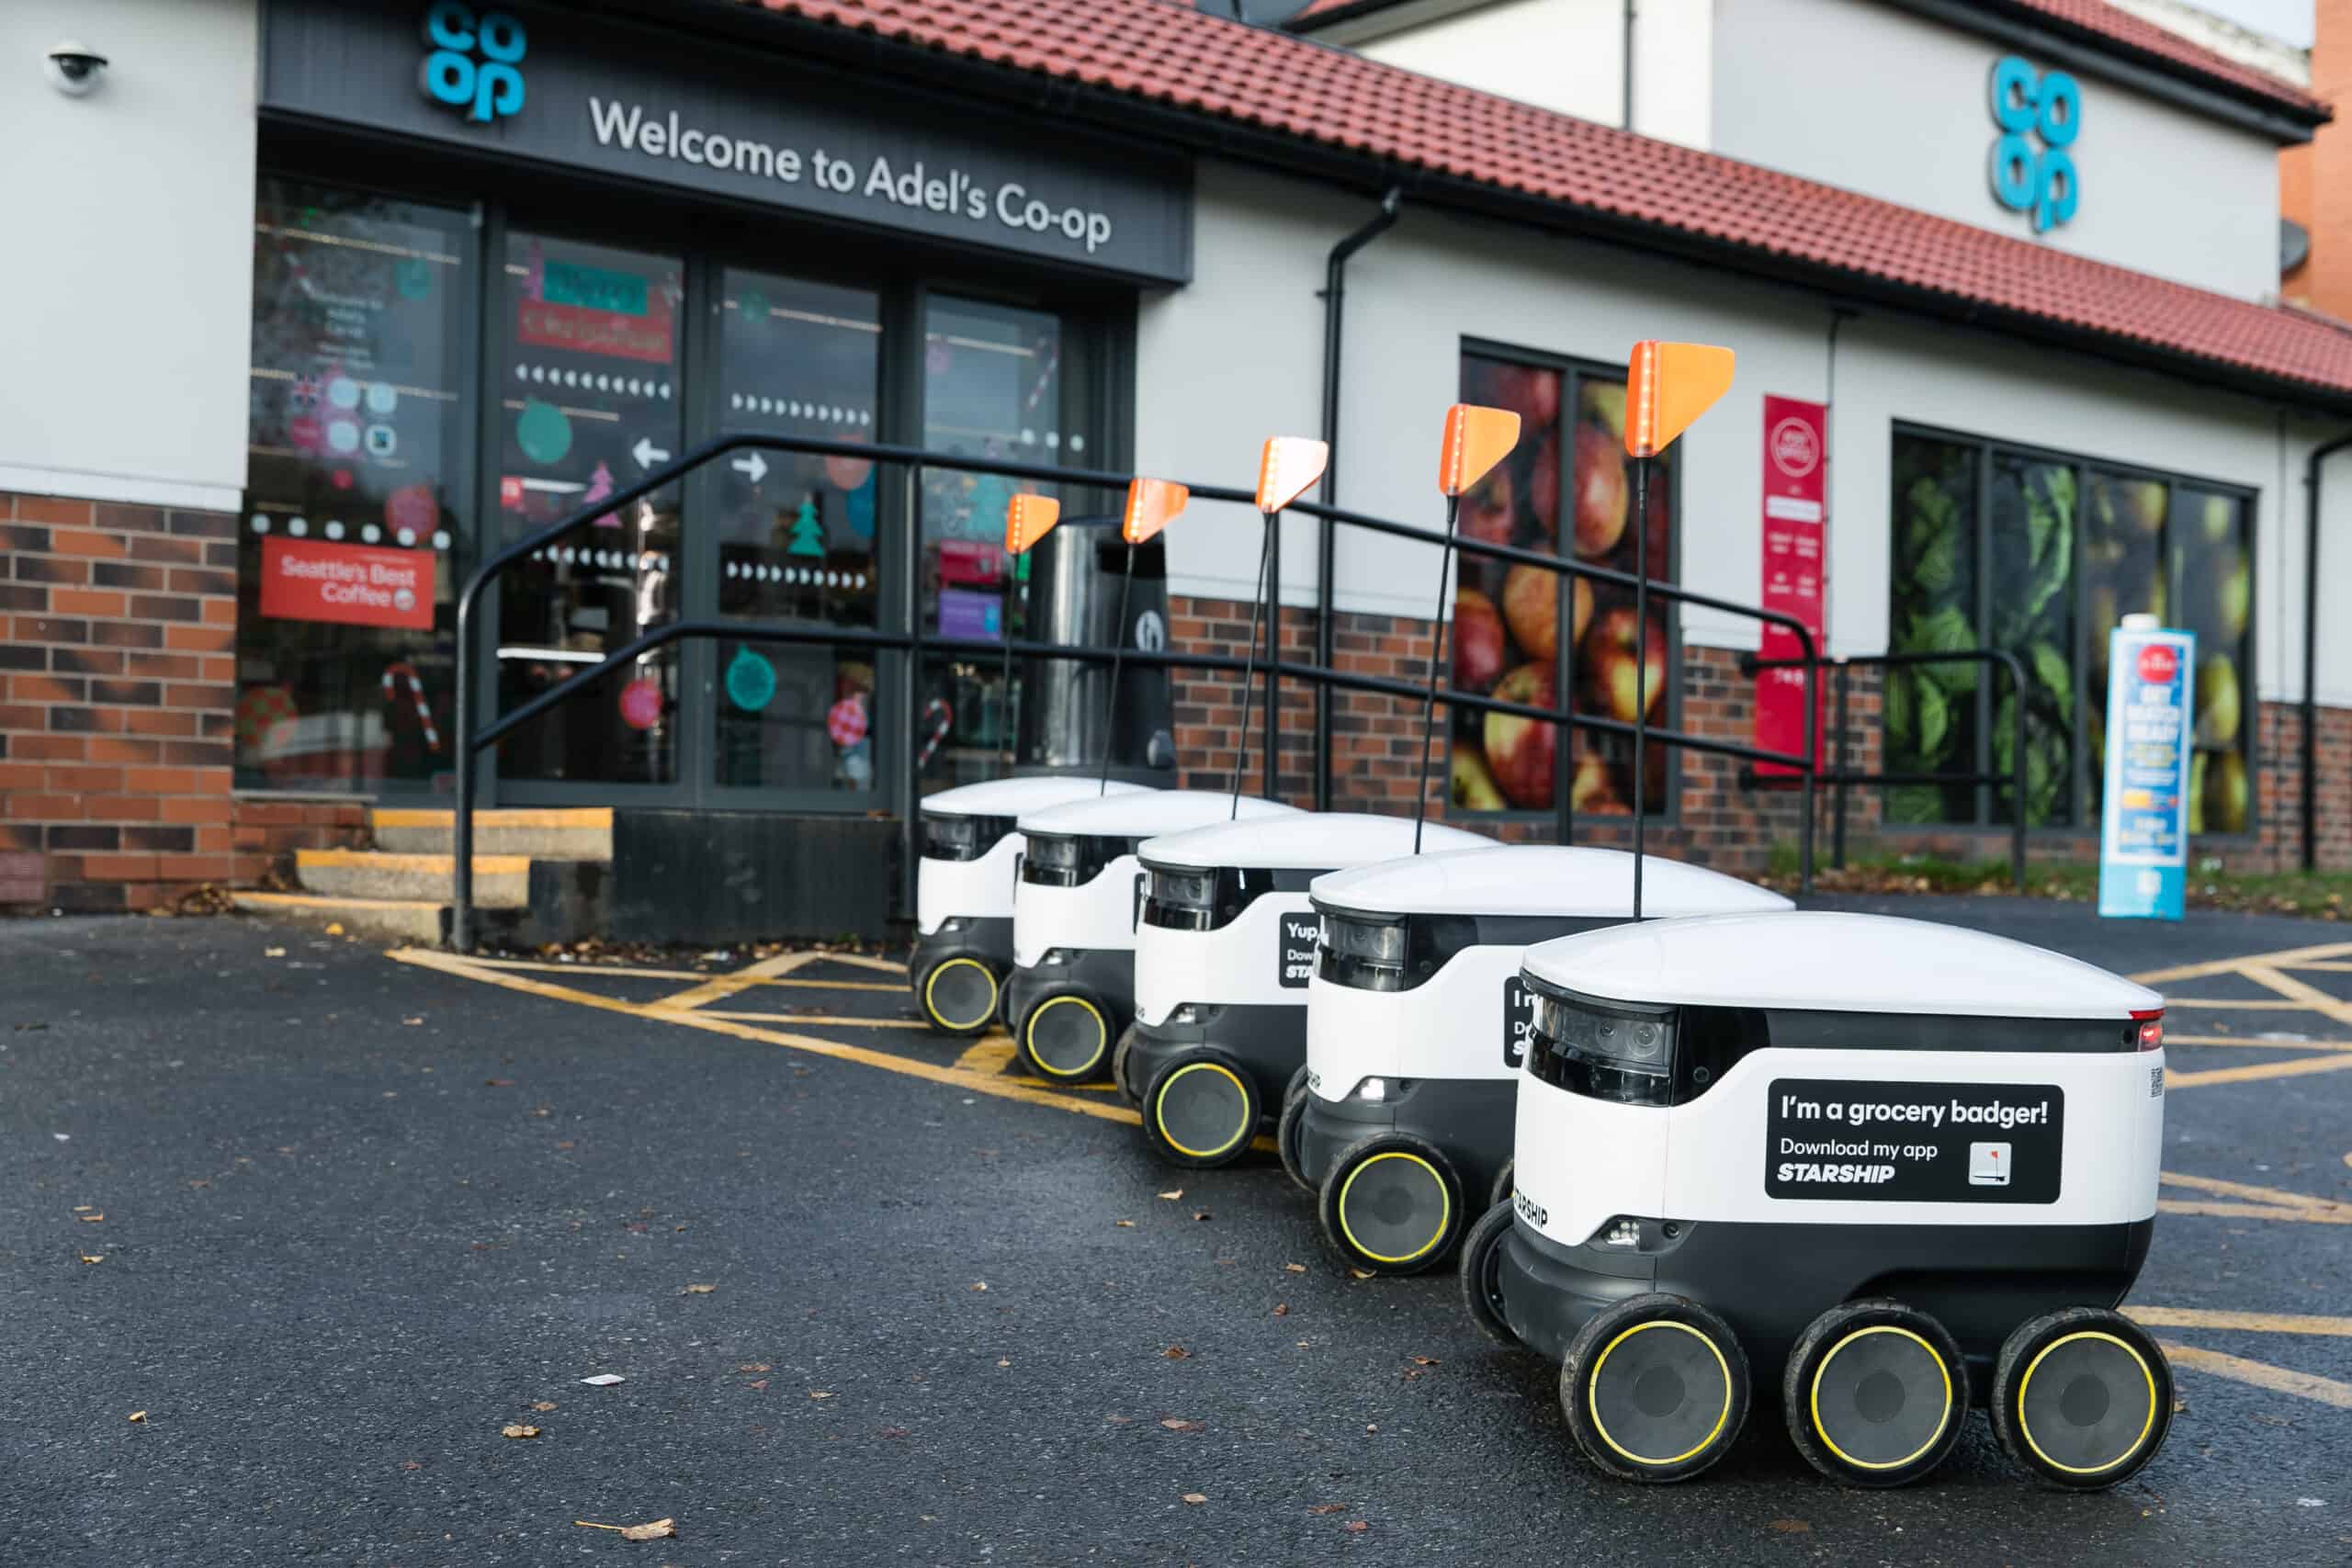 Robots roll out in Yorkshire as Co-op extends its autonomous food delivery to Leeds